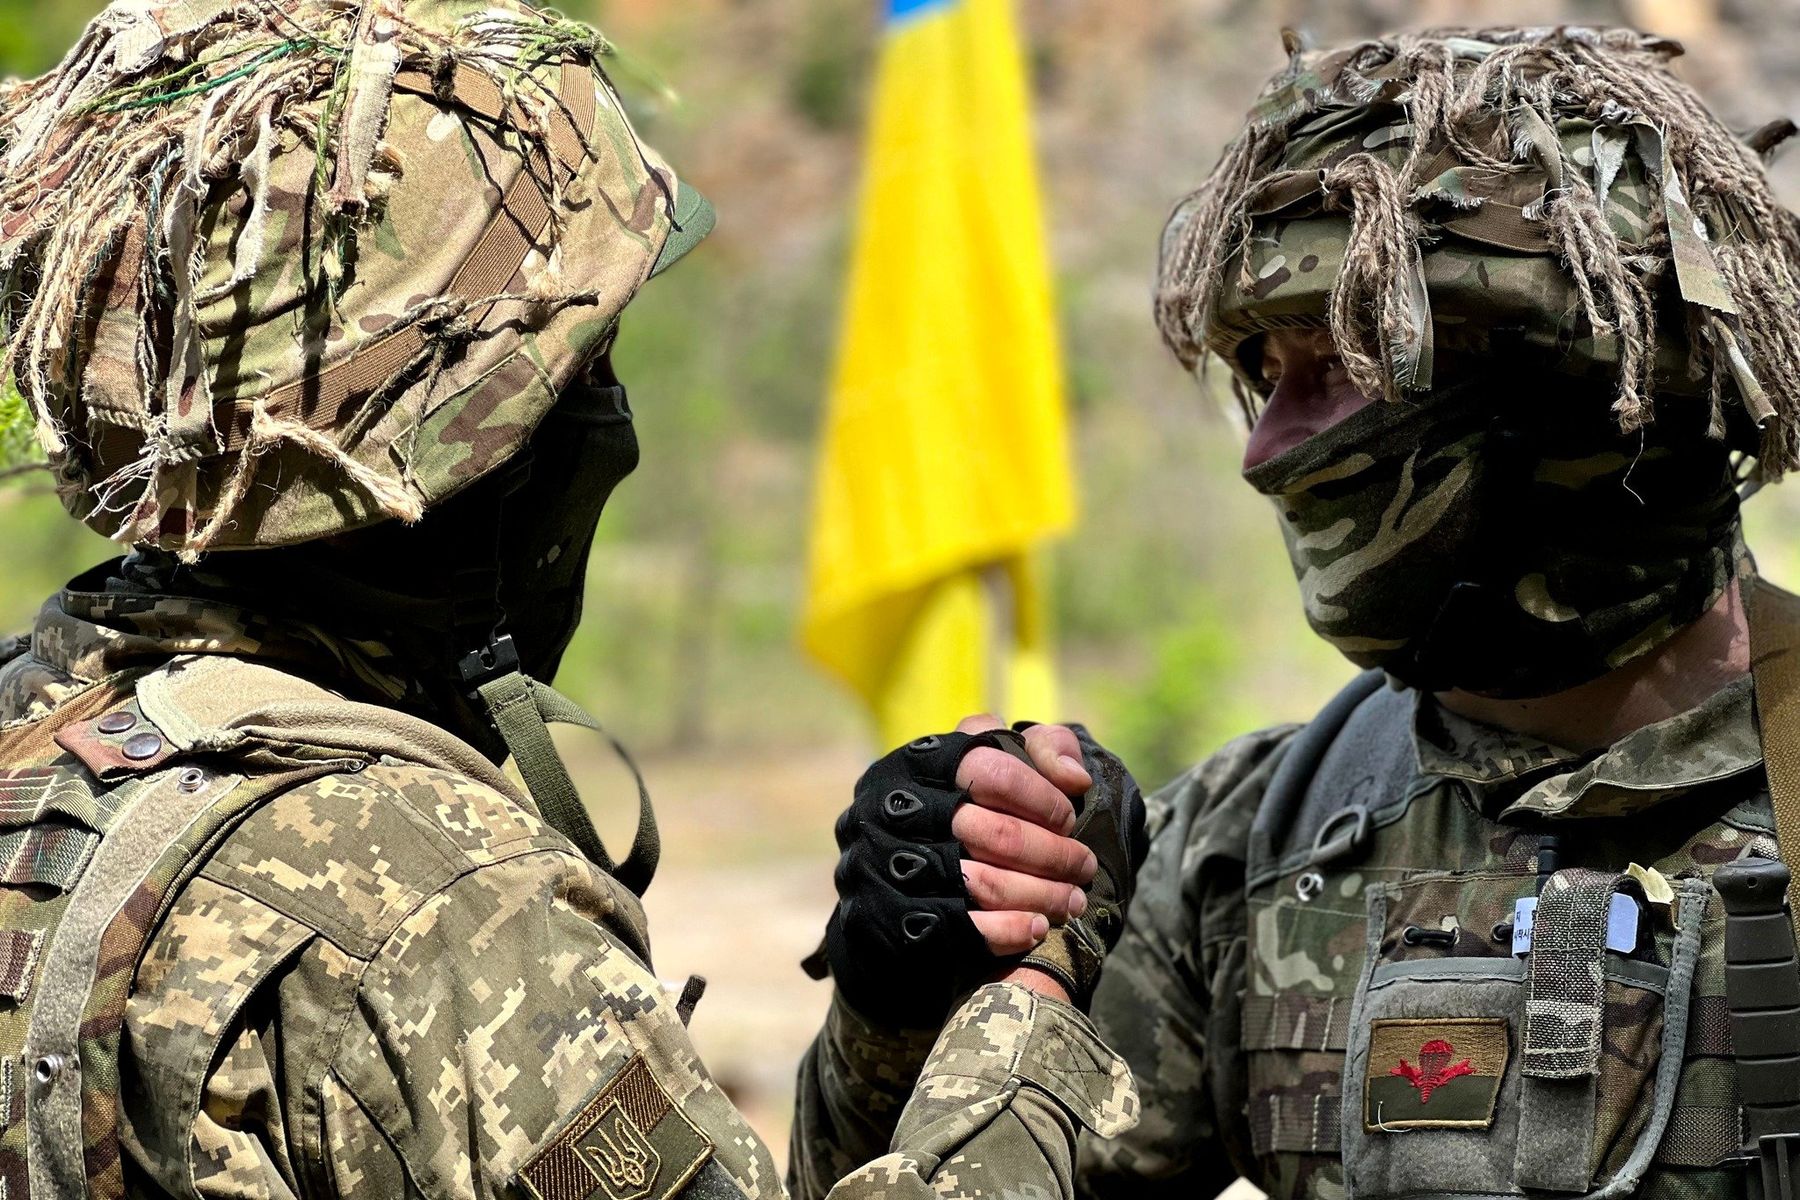 The Head of the UGCC congratulated the defenders of Ukraine, who shielded our people with their chests from rockets, bomb attacks, and bullets of the occupiers